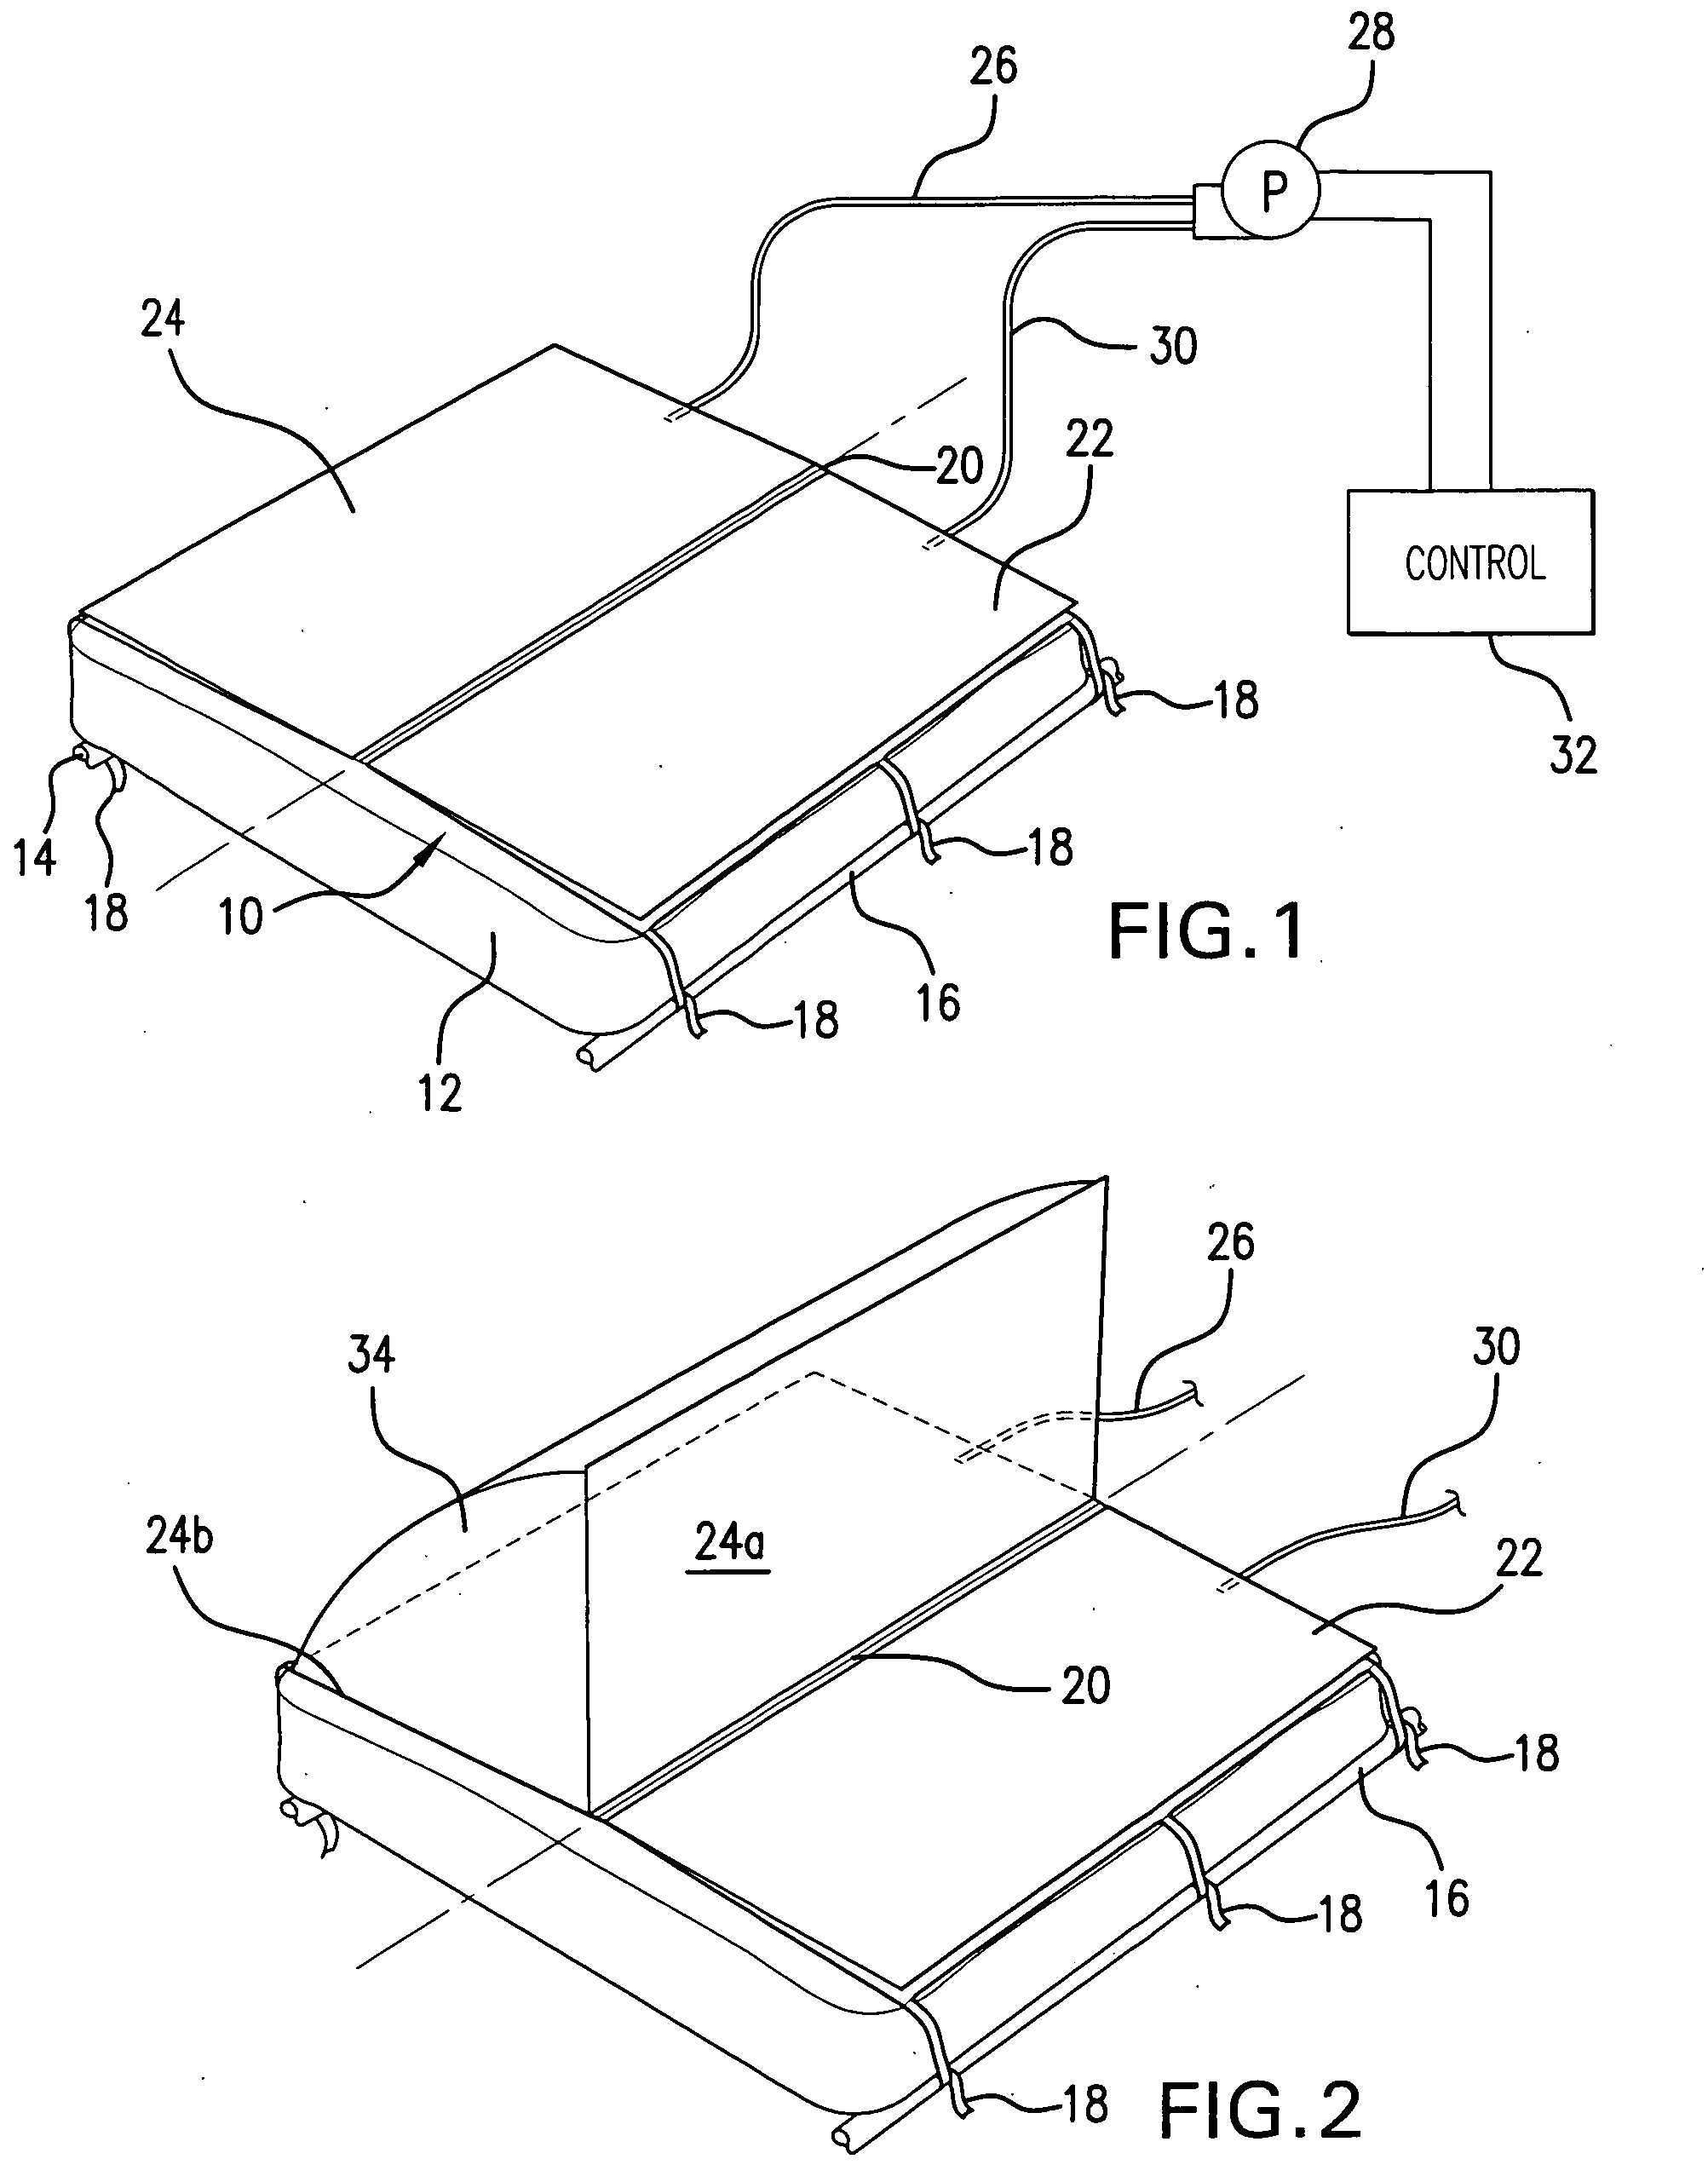 Inflatable air mattress for rotating patients